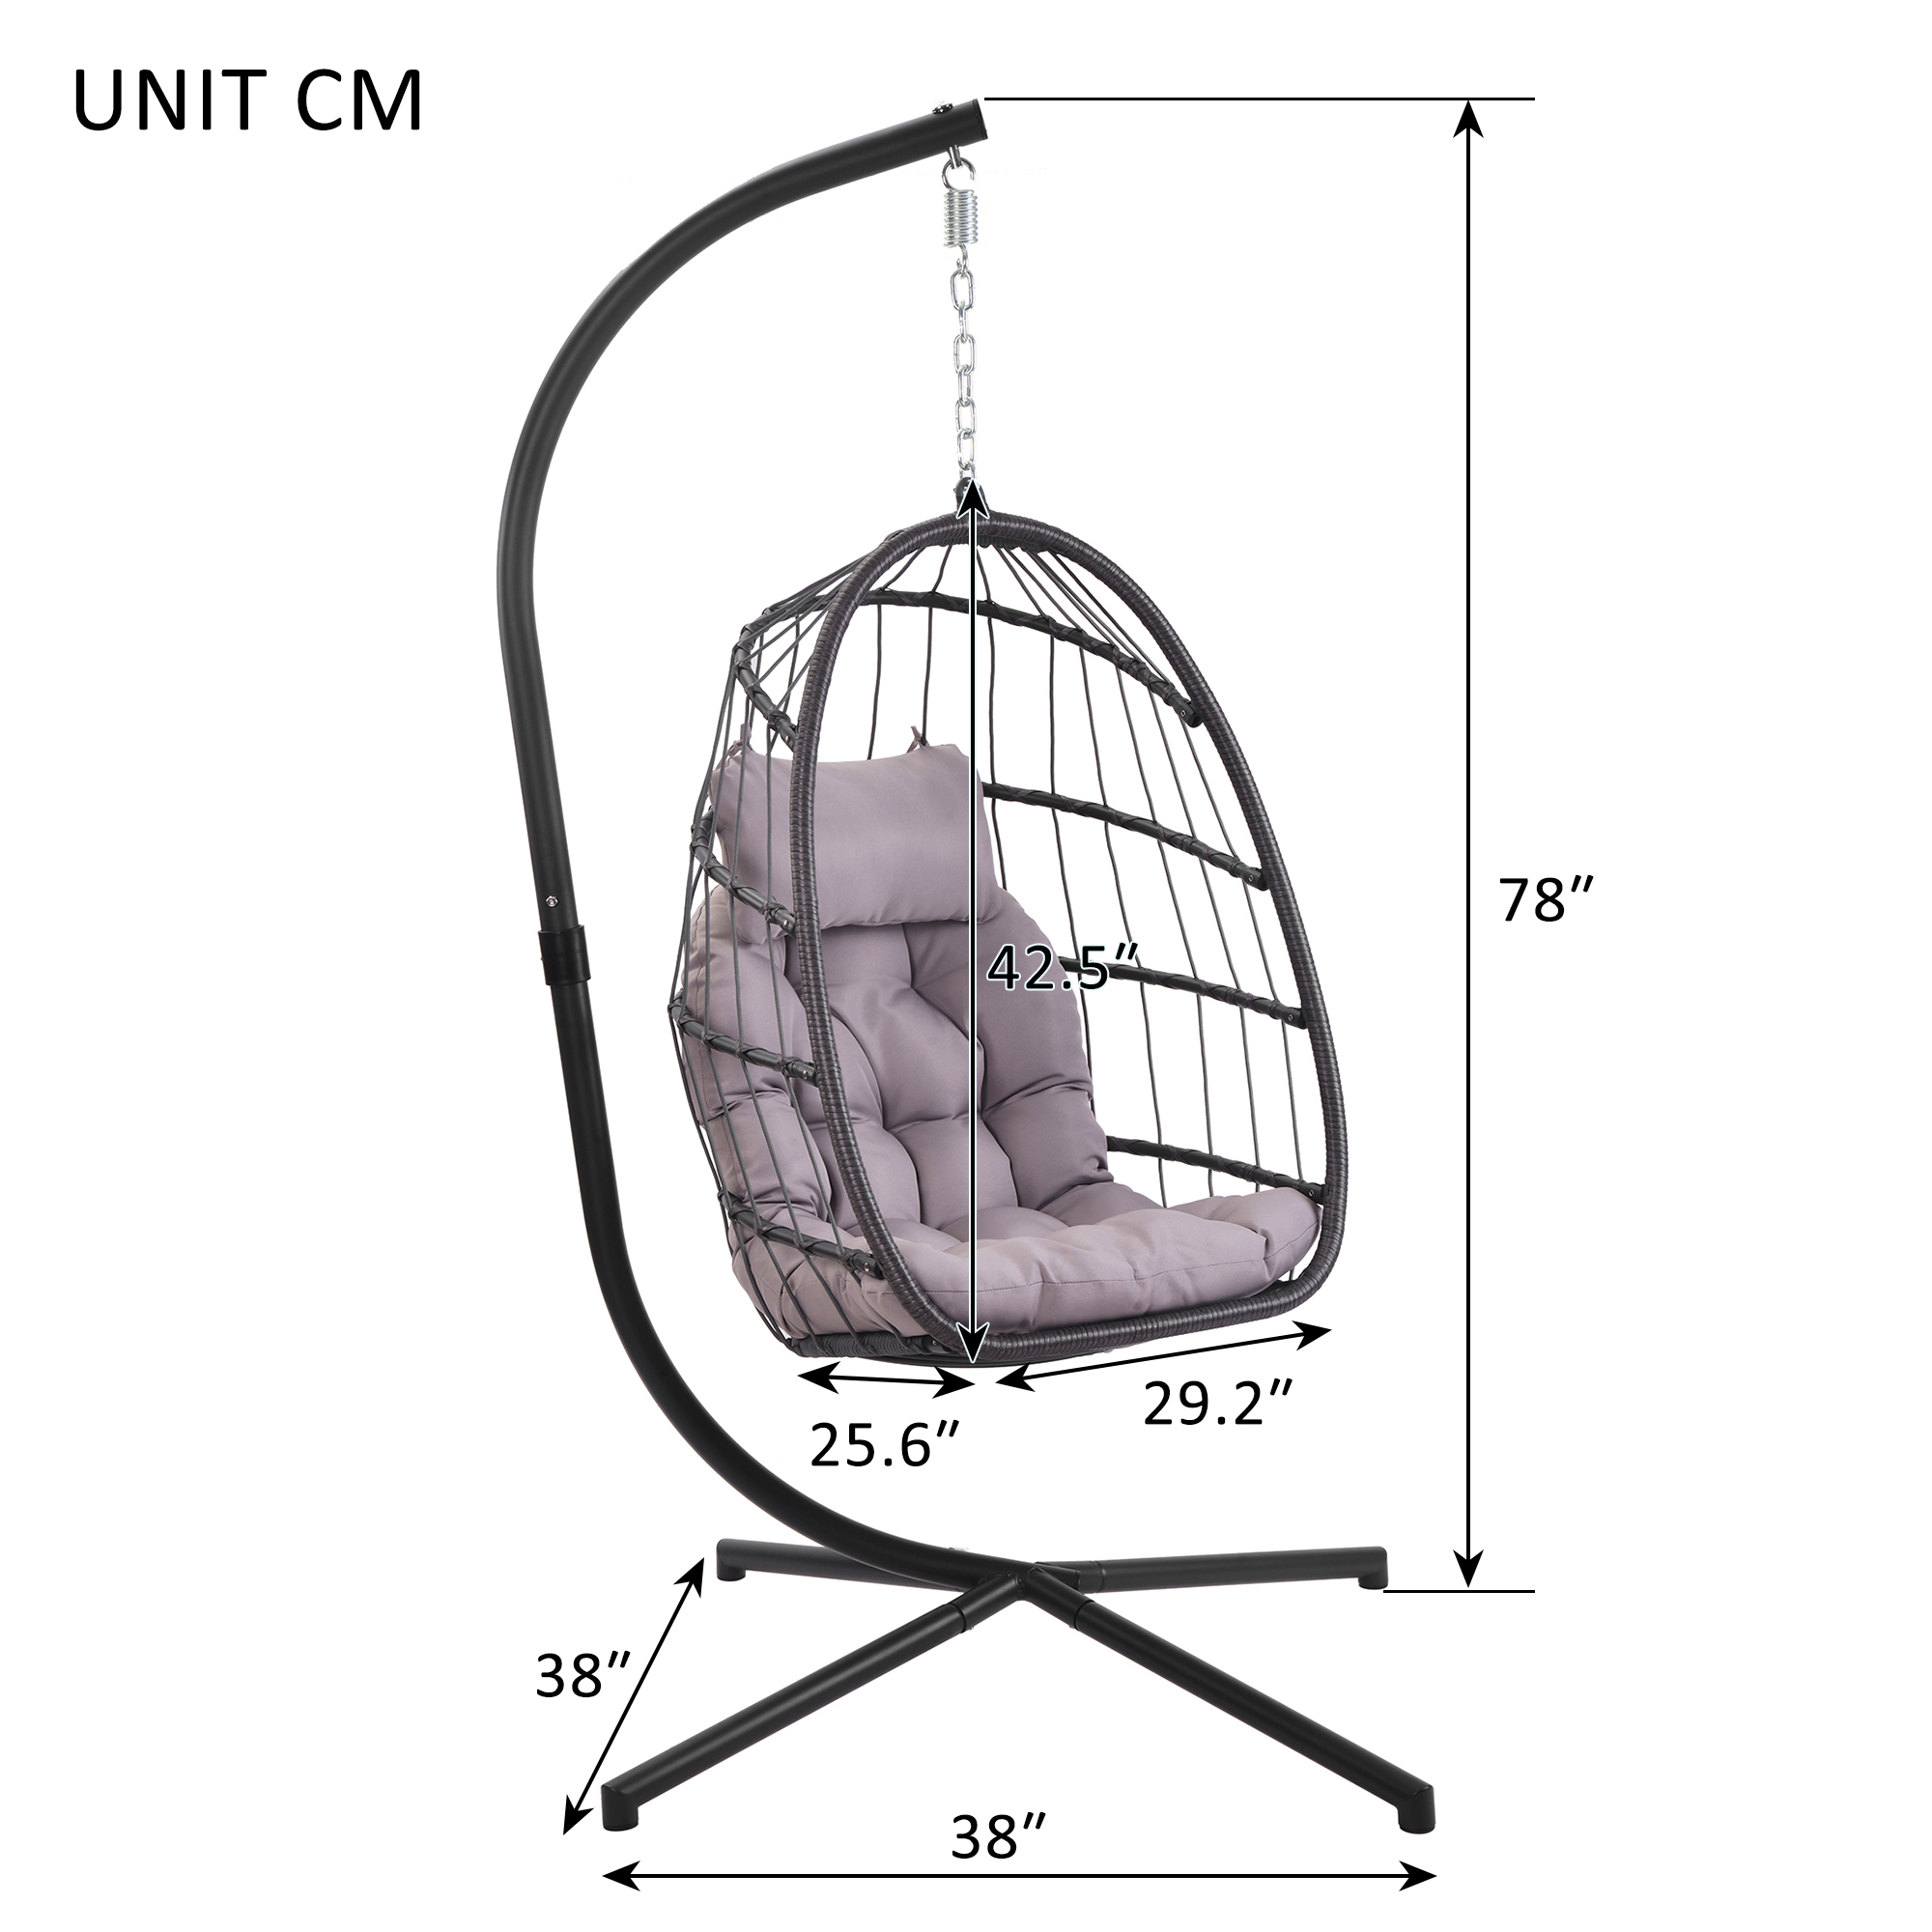 Outdoor Swing Chair, Wicker Egg Chair with Stand and Cushions, Hanging Chair for Bedroom Patio Porch Balcony, Hammock Chair Outdoor Lounger, Gray - image 3 of 6